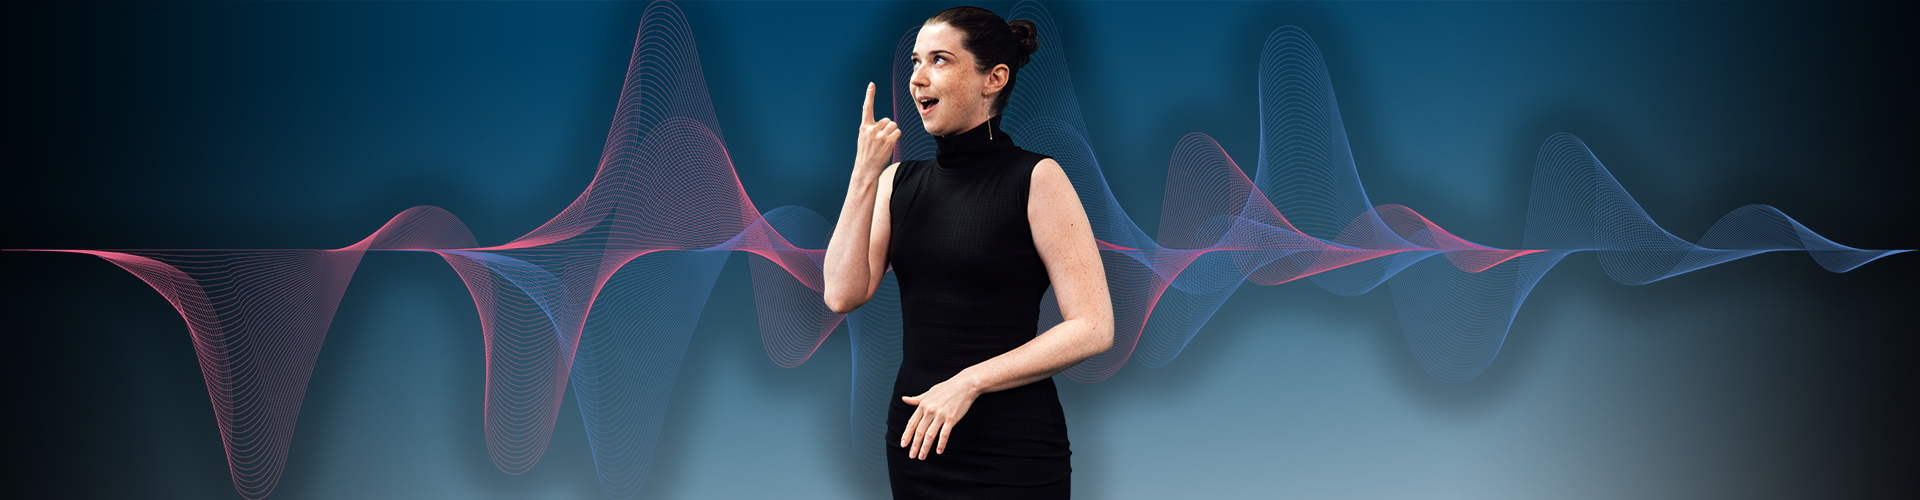 Woman in black dress with mouth open and finger pointed up with sound waves in the background